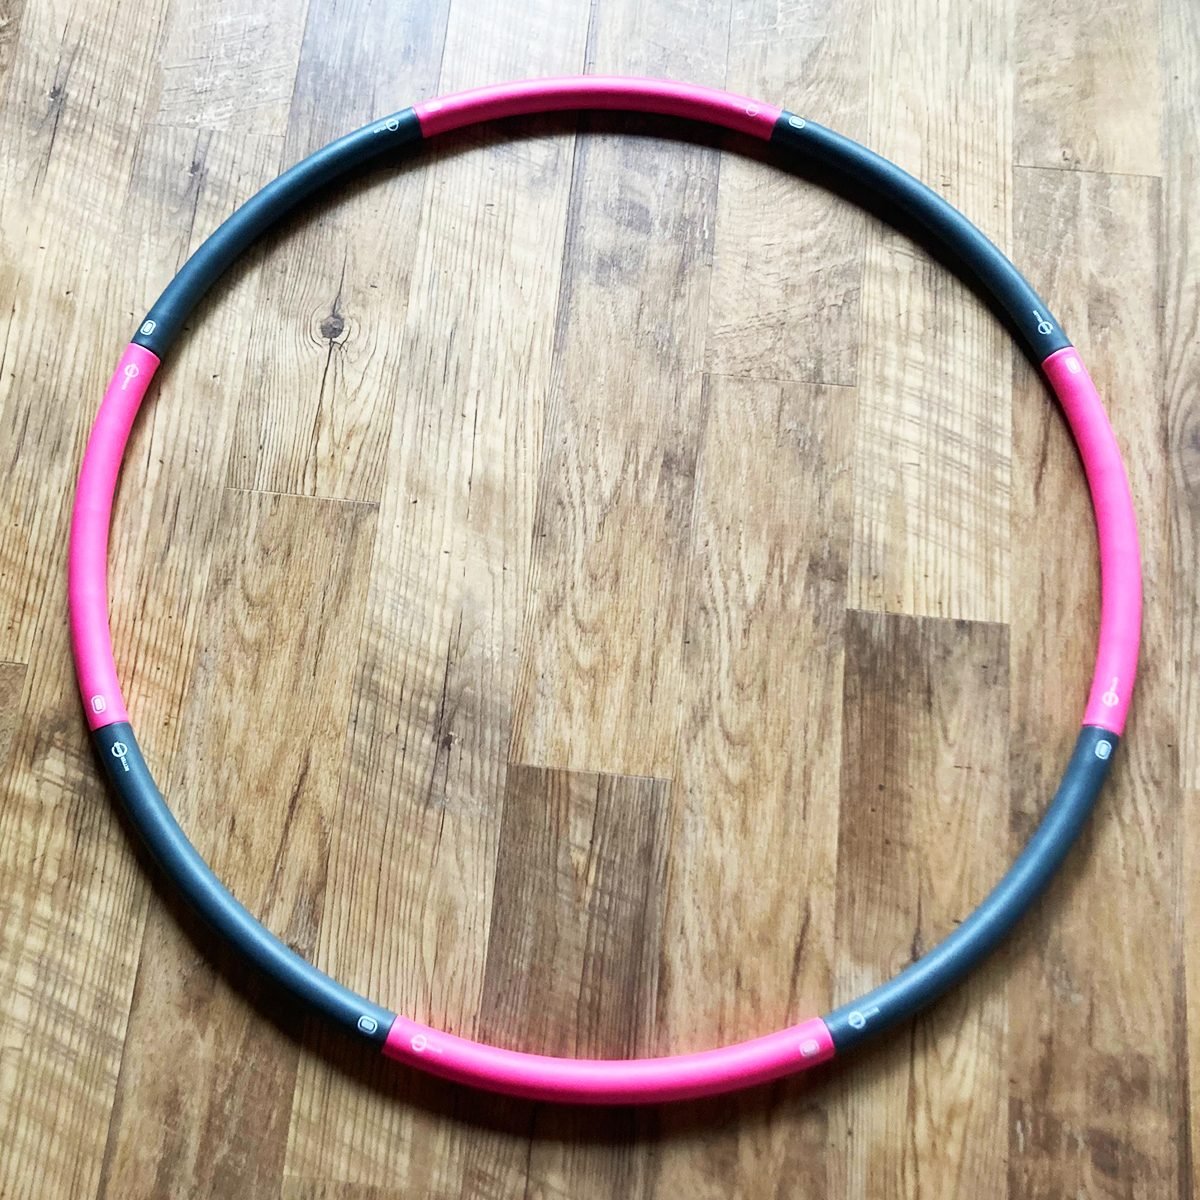 I Tried a Weighted Hula Hoop for a Fun, At-Home Workout